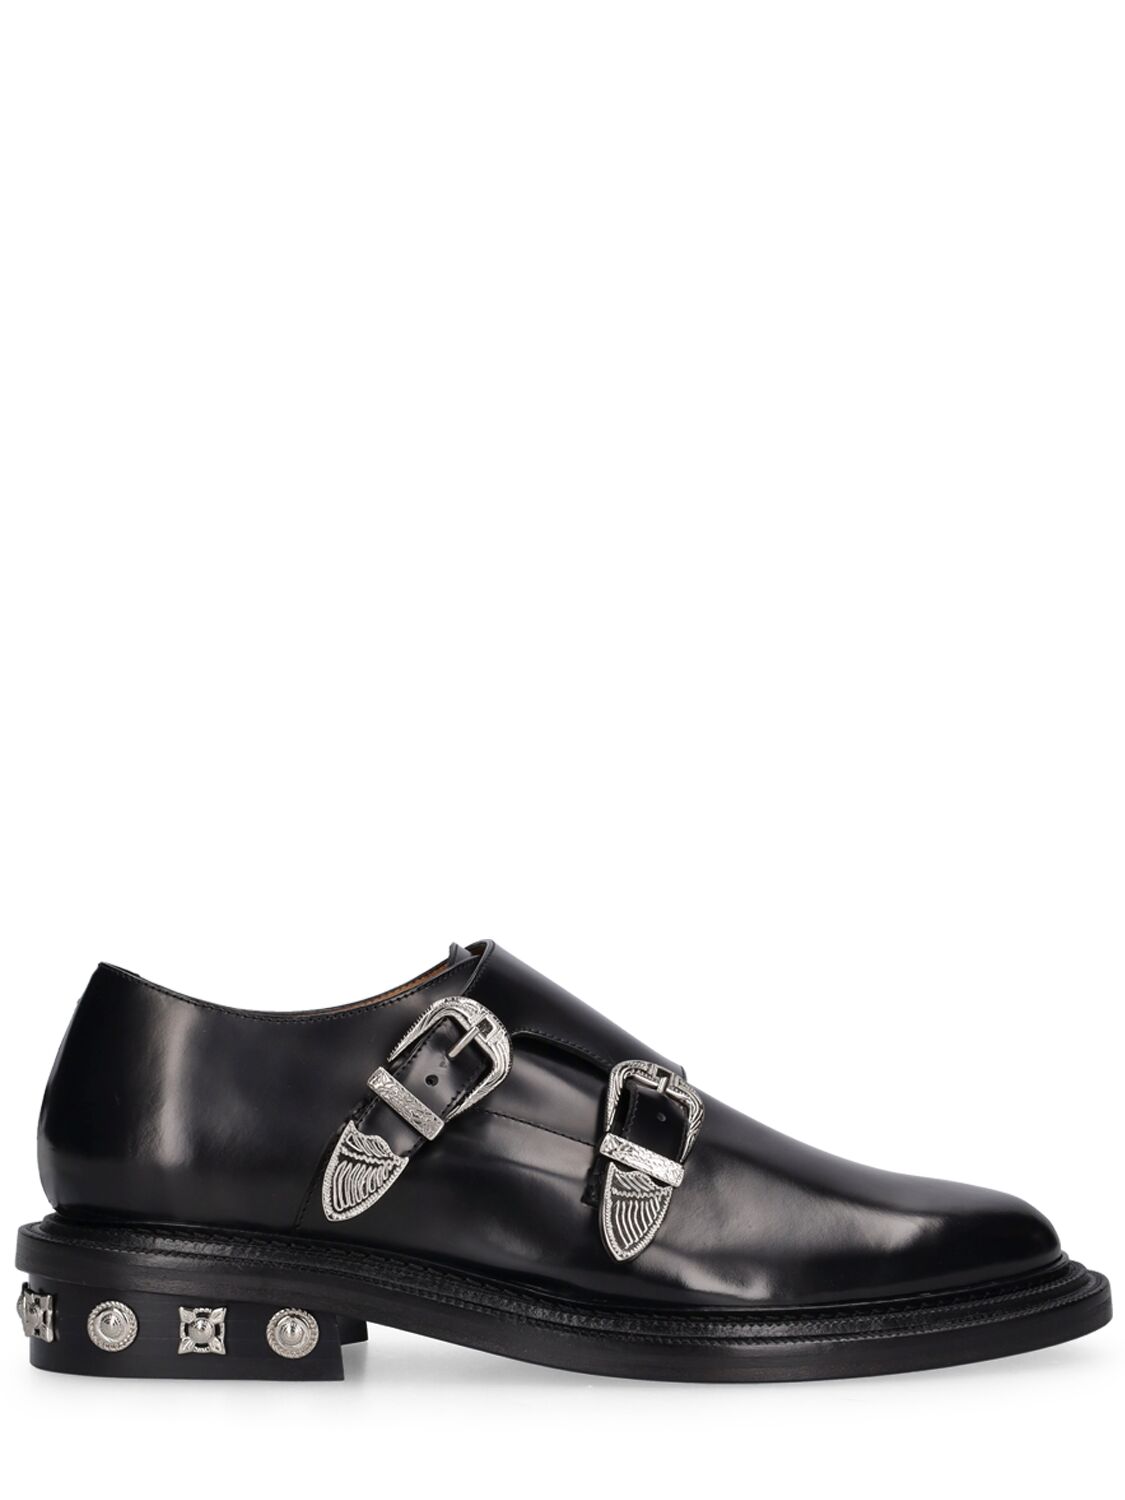 Image of Black Polido Leather Shoes